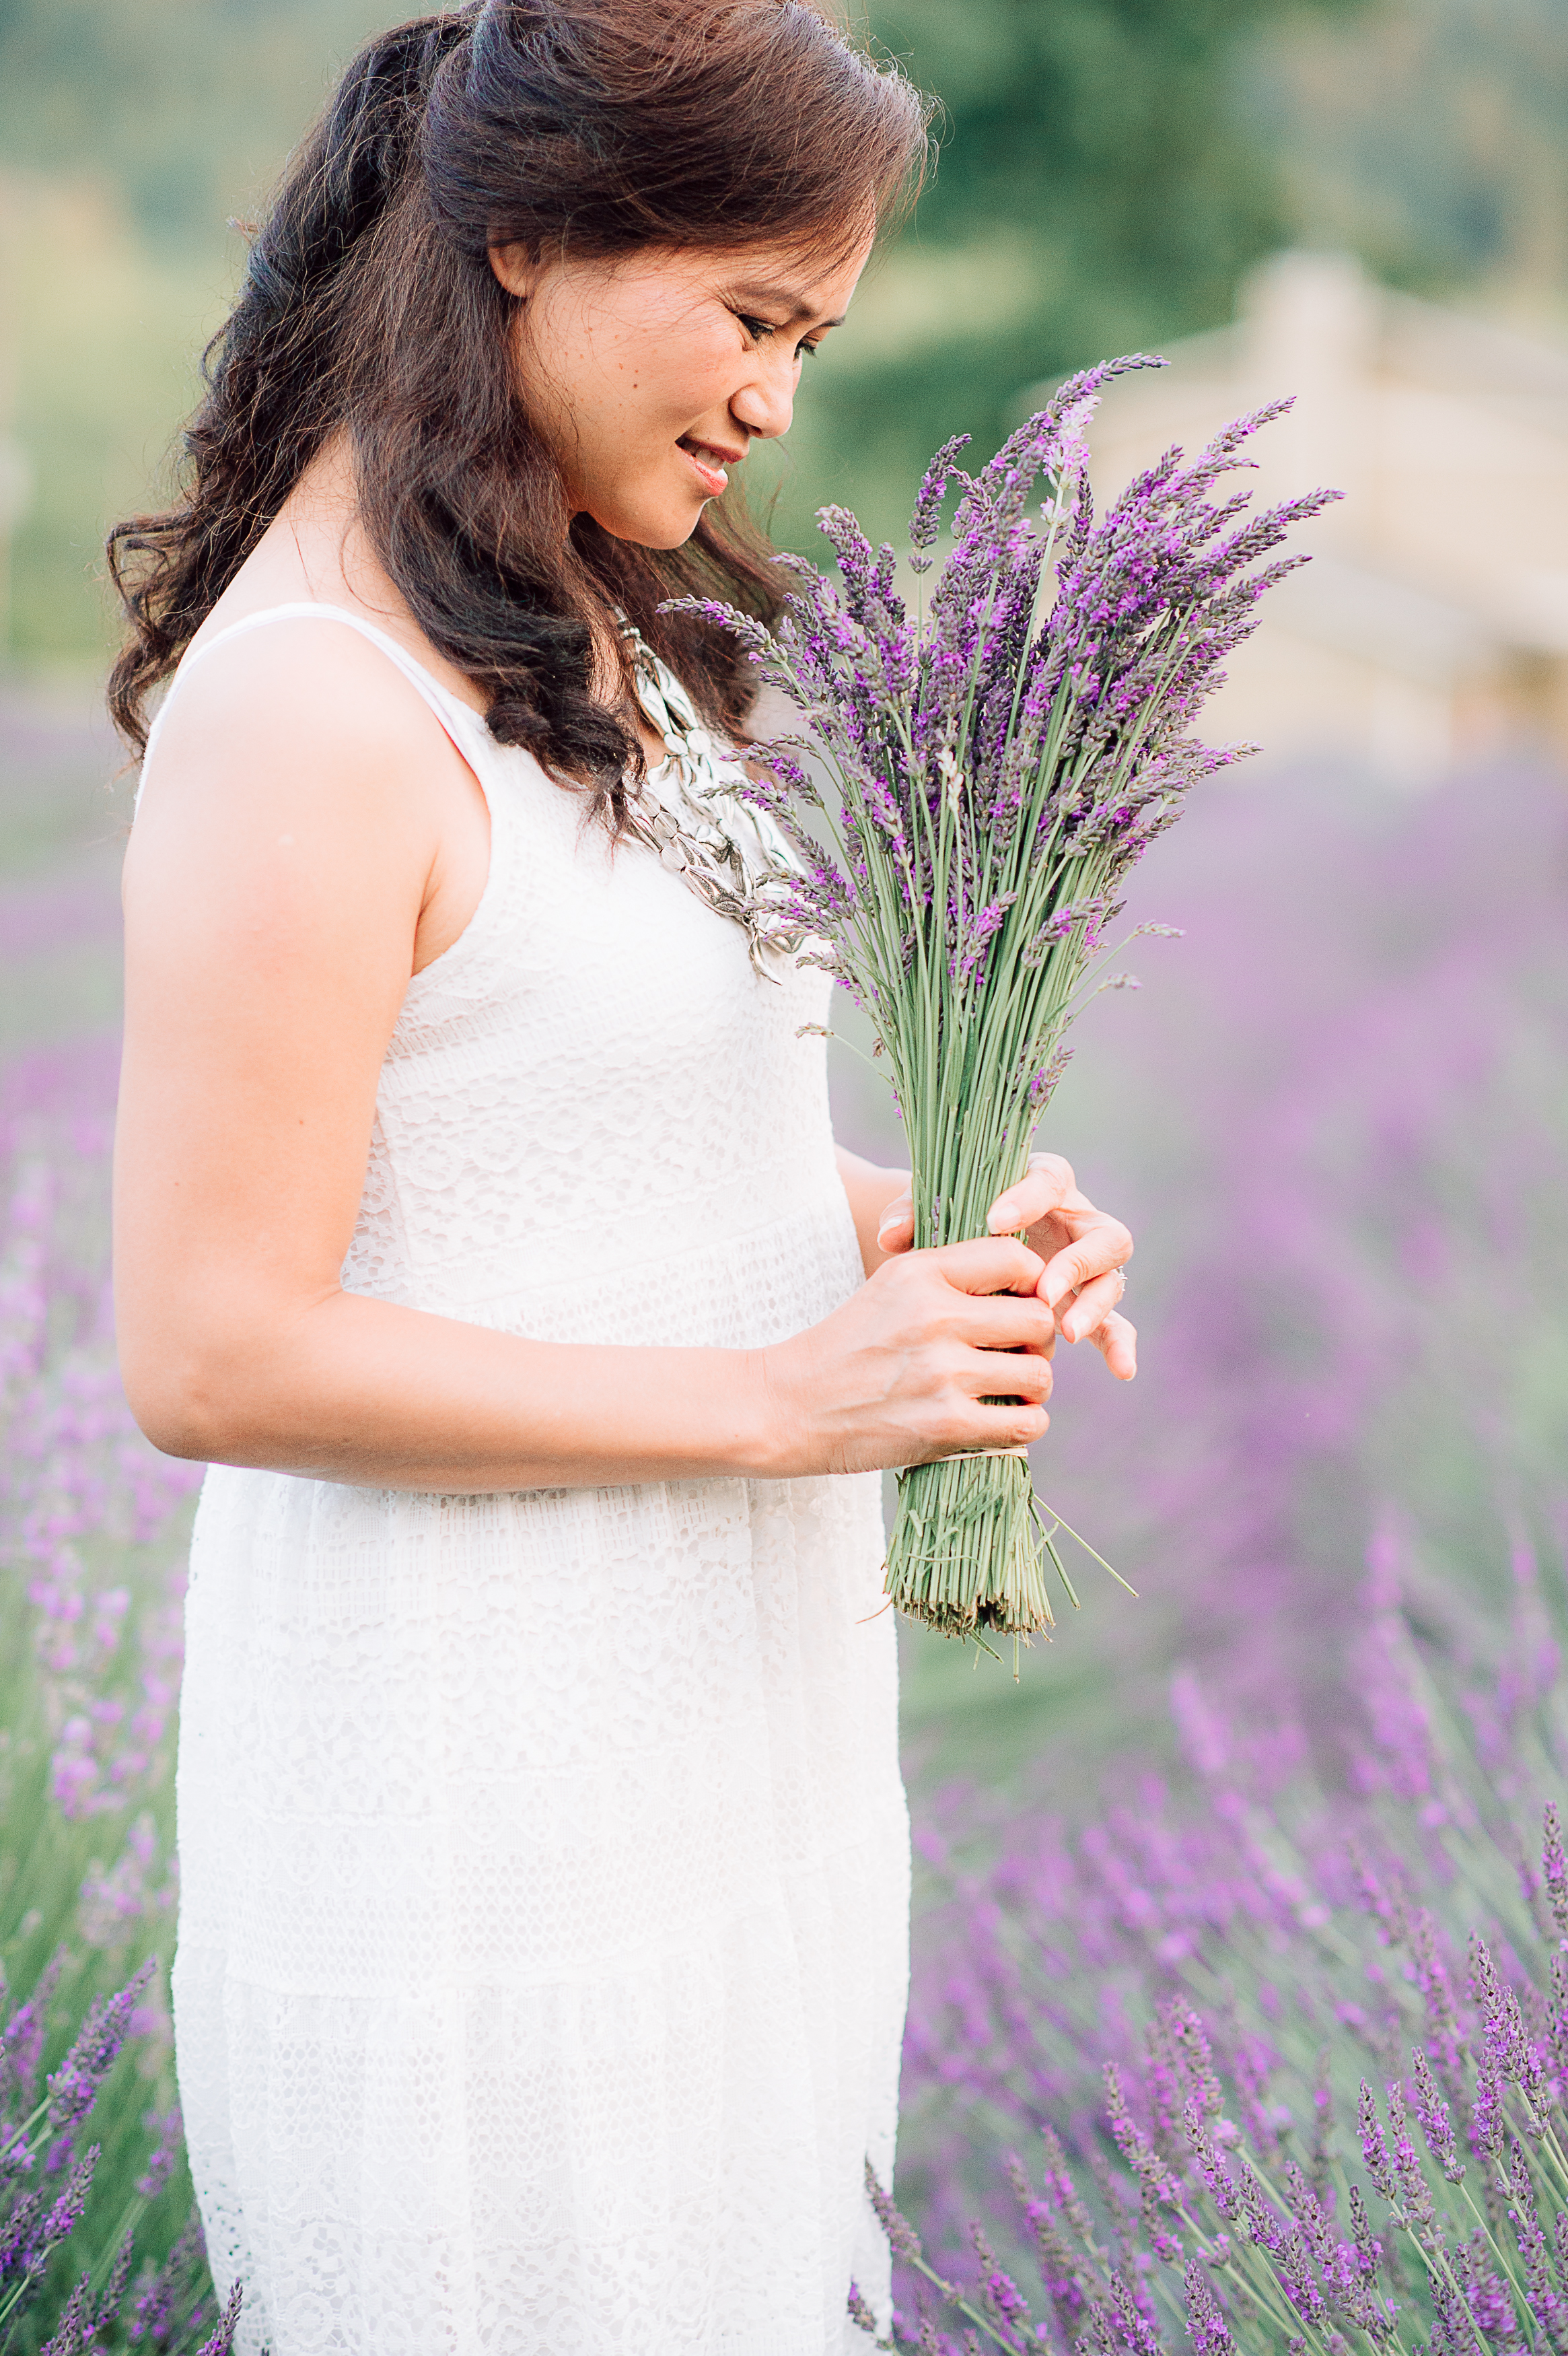 engagement_lavenderfield_youseephotography_LidiaOtto (75).jpg